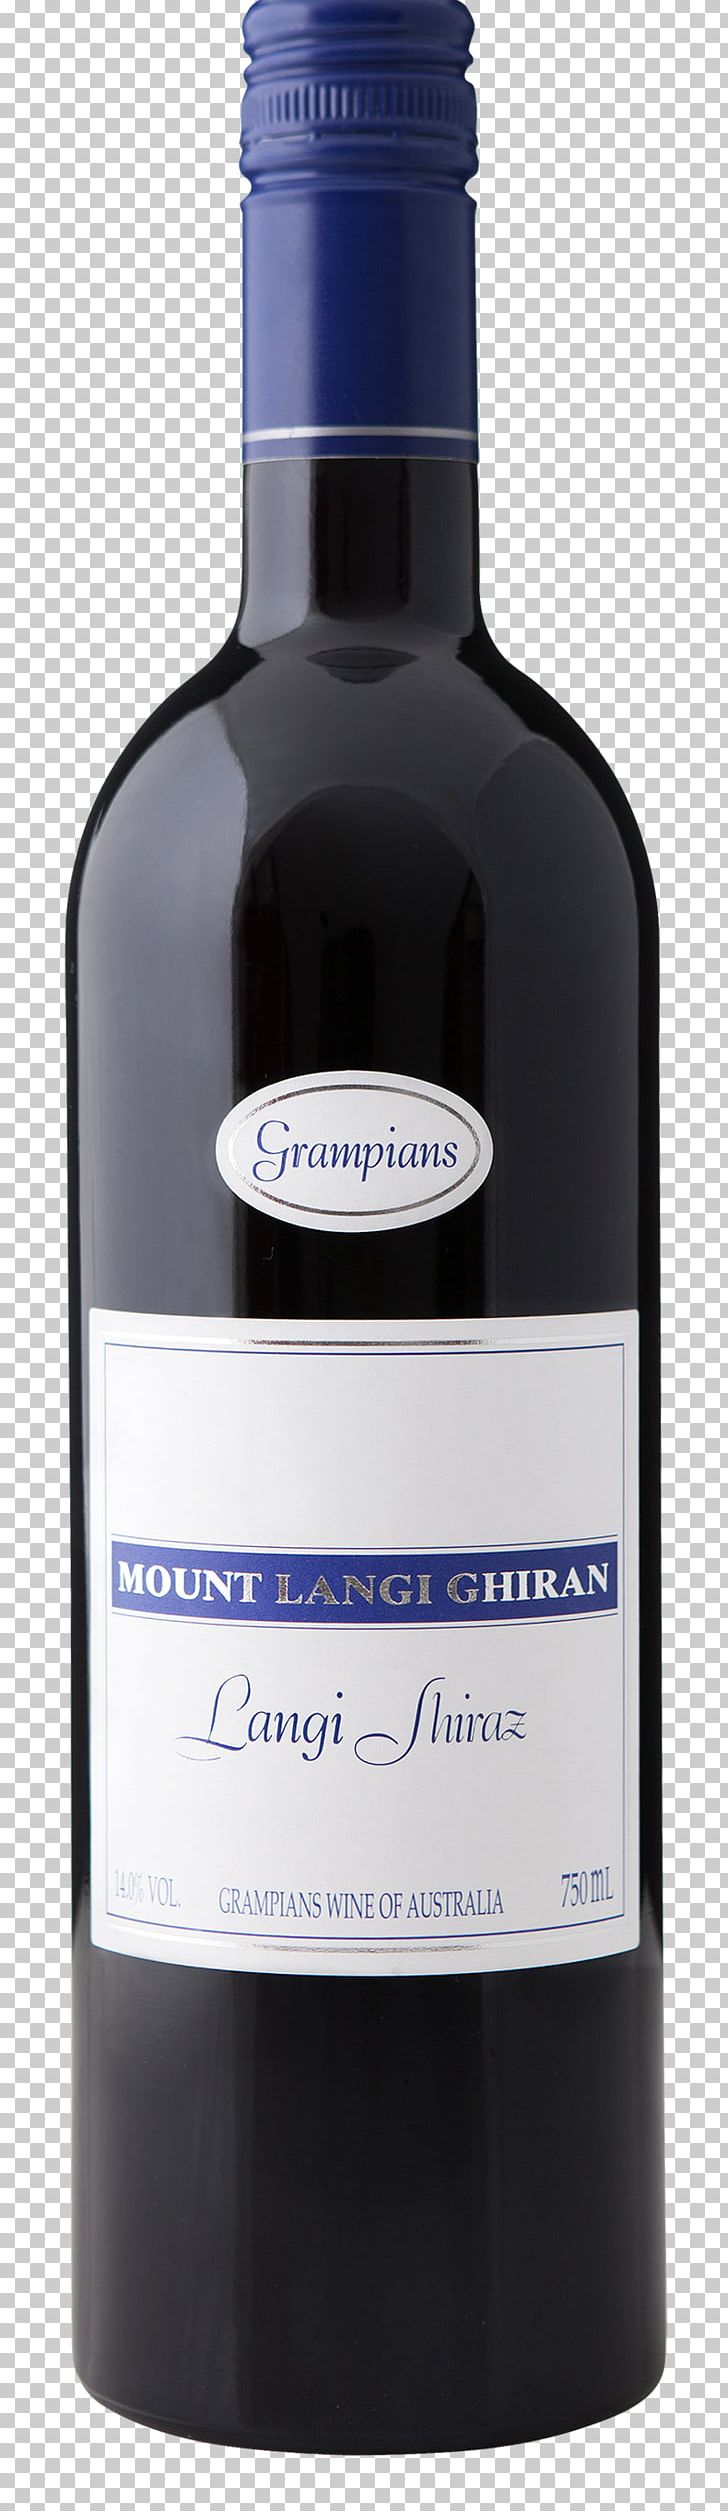 Hollows Shiraz Mount Langi Ghiran Red Wine Liqueur PNG, Clipart, Alcoholic Beverage, Bottle, Distilled Beverage, Drink, Glass Free PNG Download